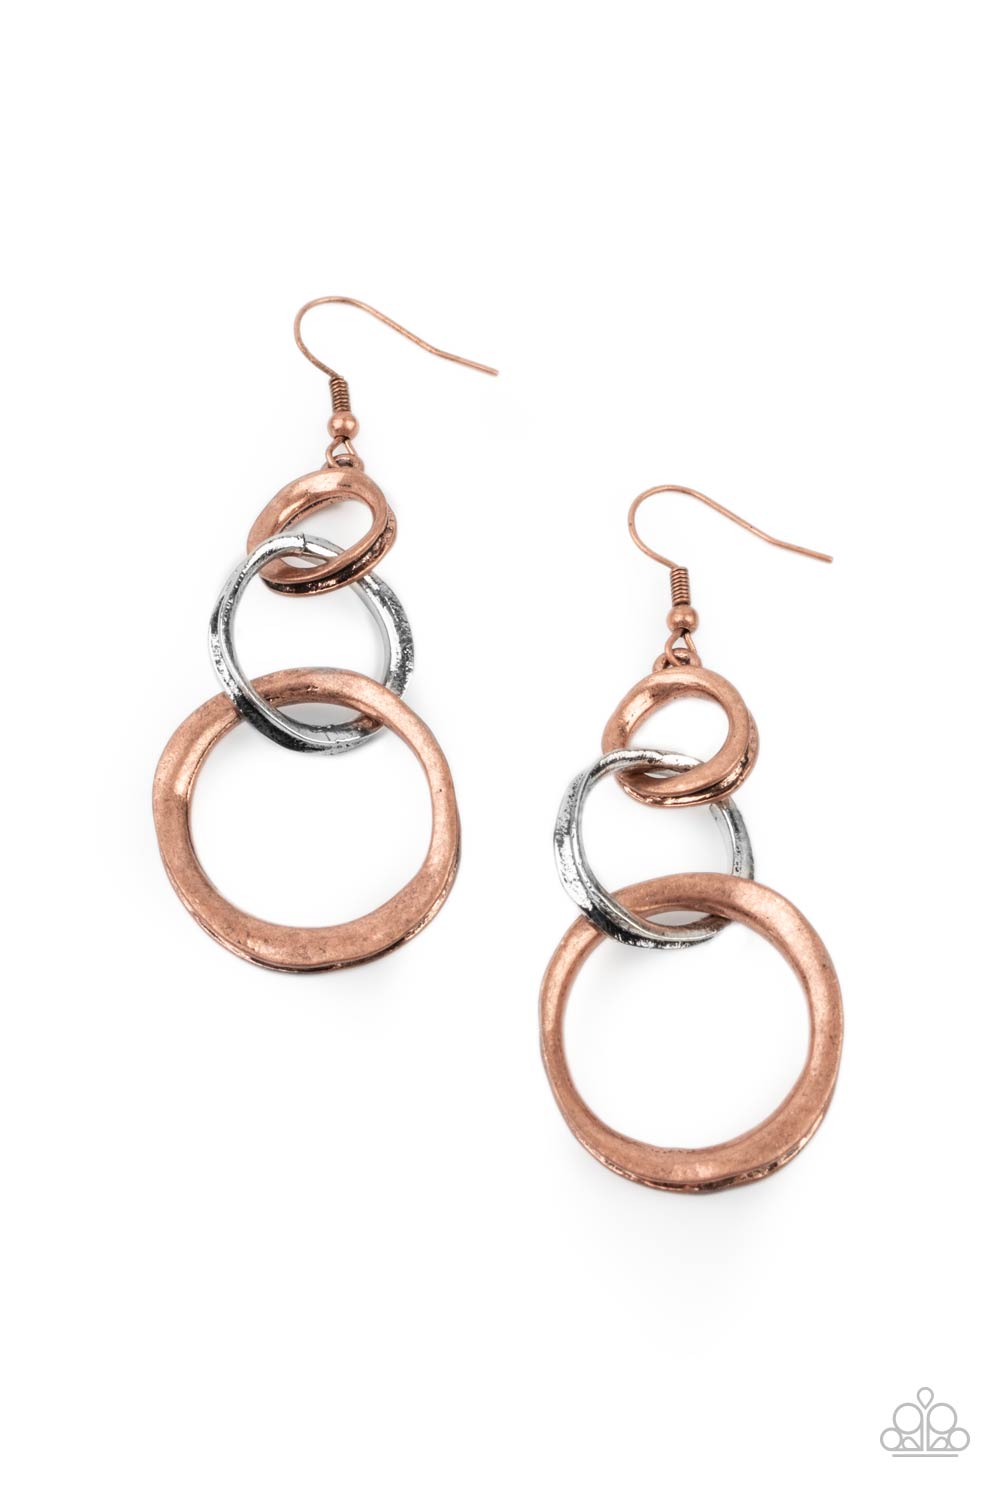 Harmoniously Handcrafted - Copper - The V Resale Boutique